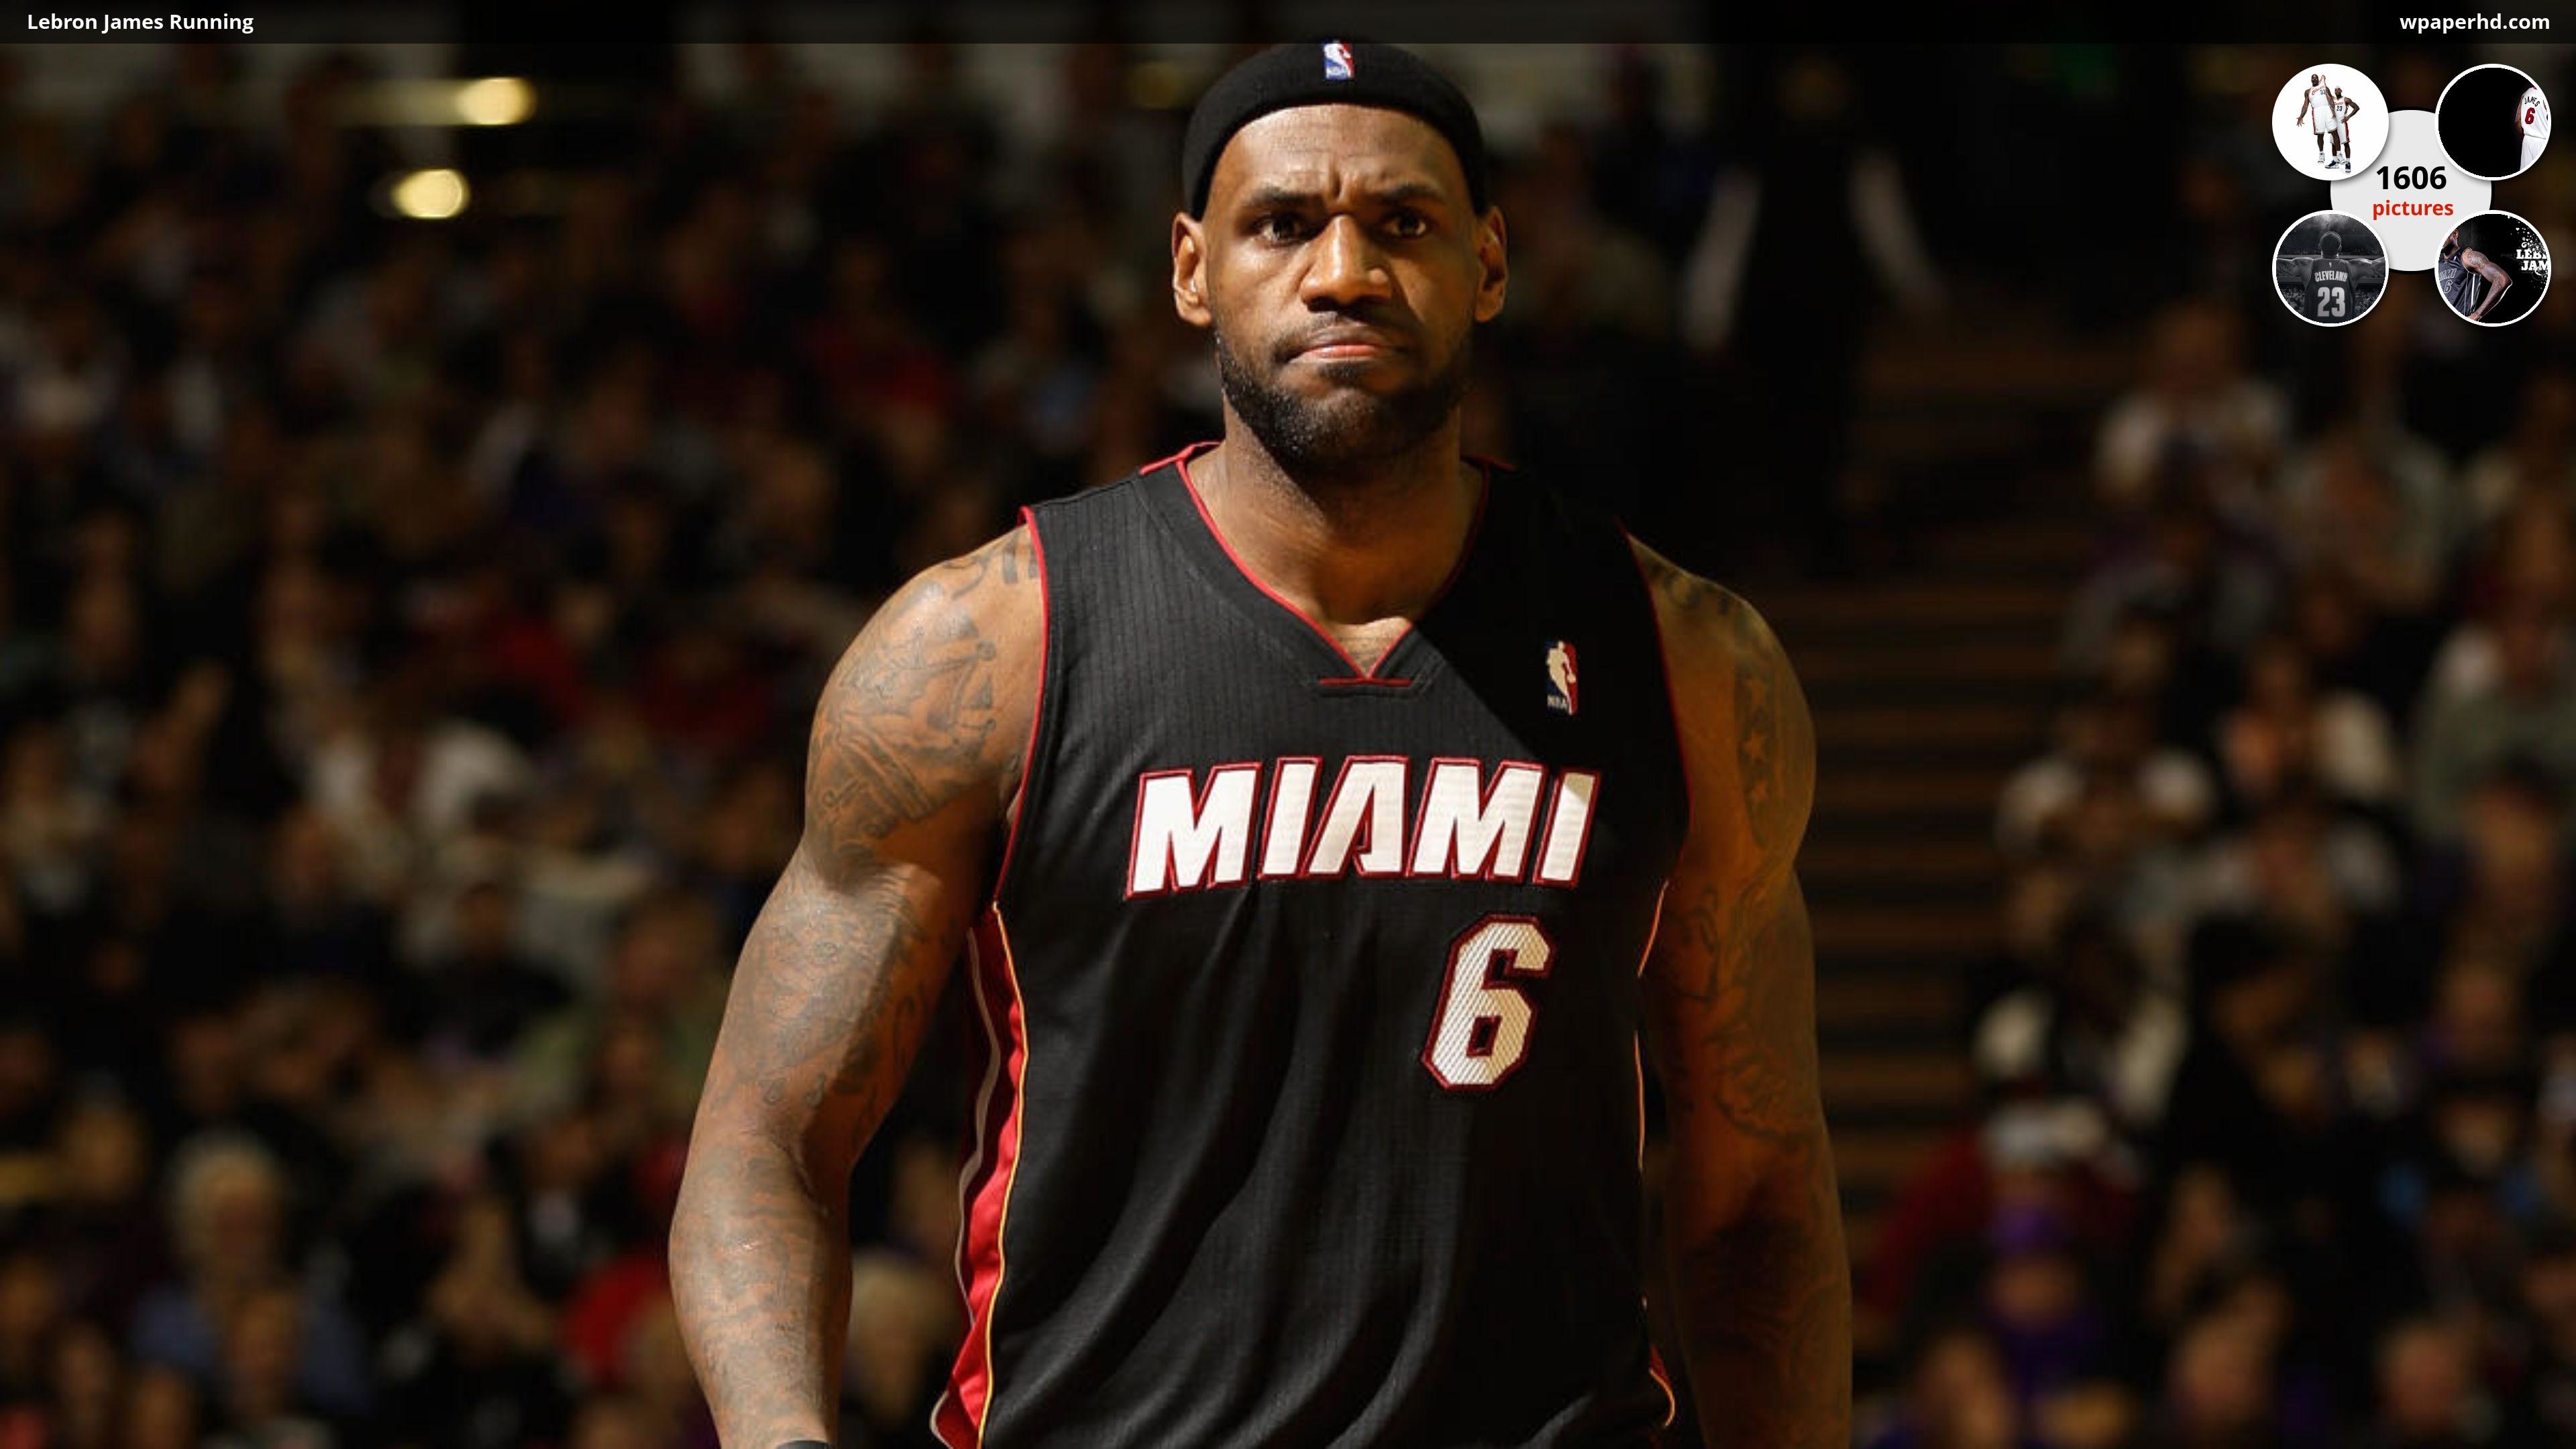 3840x2160 You are on page with Lebron James Running wallpaper, where you can download  this picture in Original size and ...